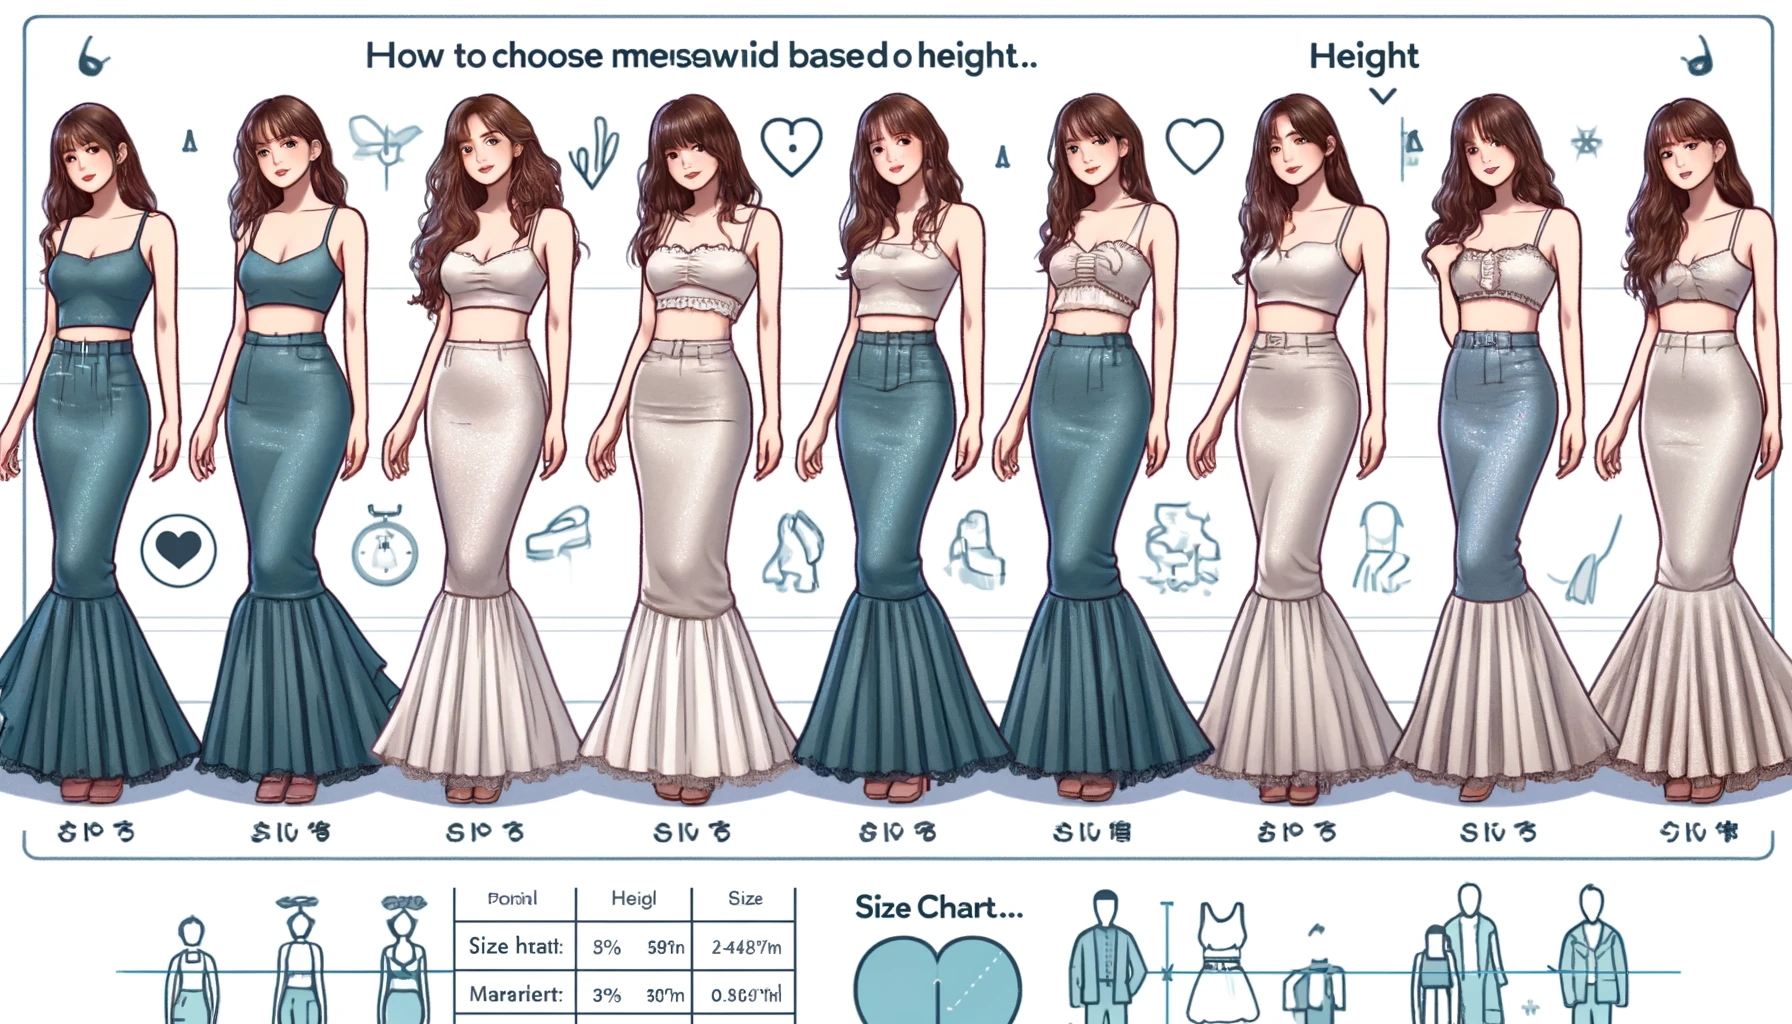 An image showing how to choose mermaid skirts based on height from GRL (Grail), a budget-friendly women's fashion brand. The image features Japanese women of various heights modeling different mermaid skirts. Size charts, measurement tips, and height-based size recommendations are displayed. The background is modern with fashion-related icons.